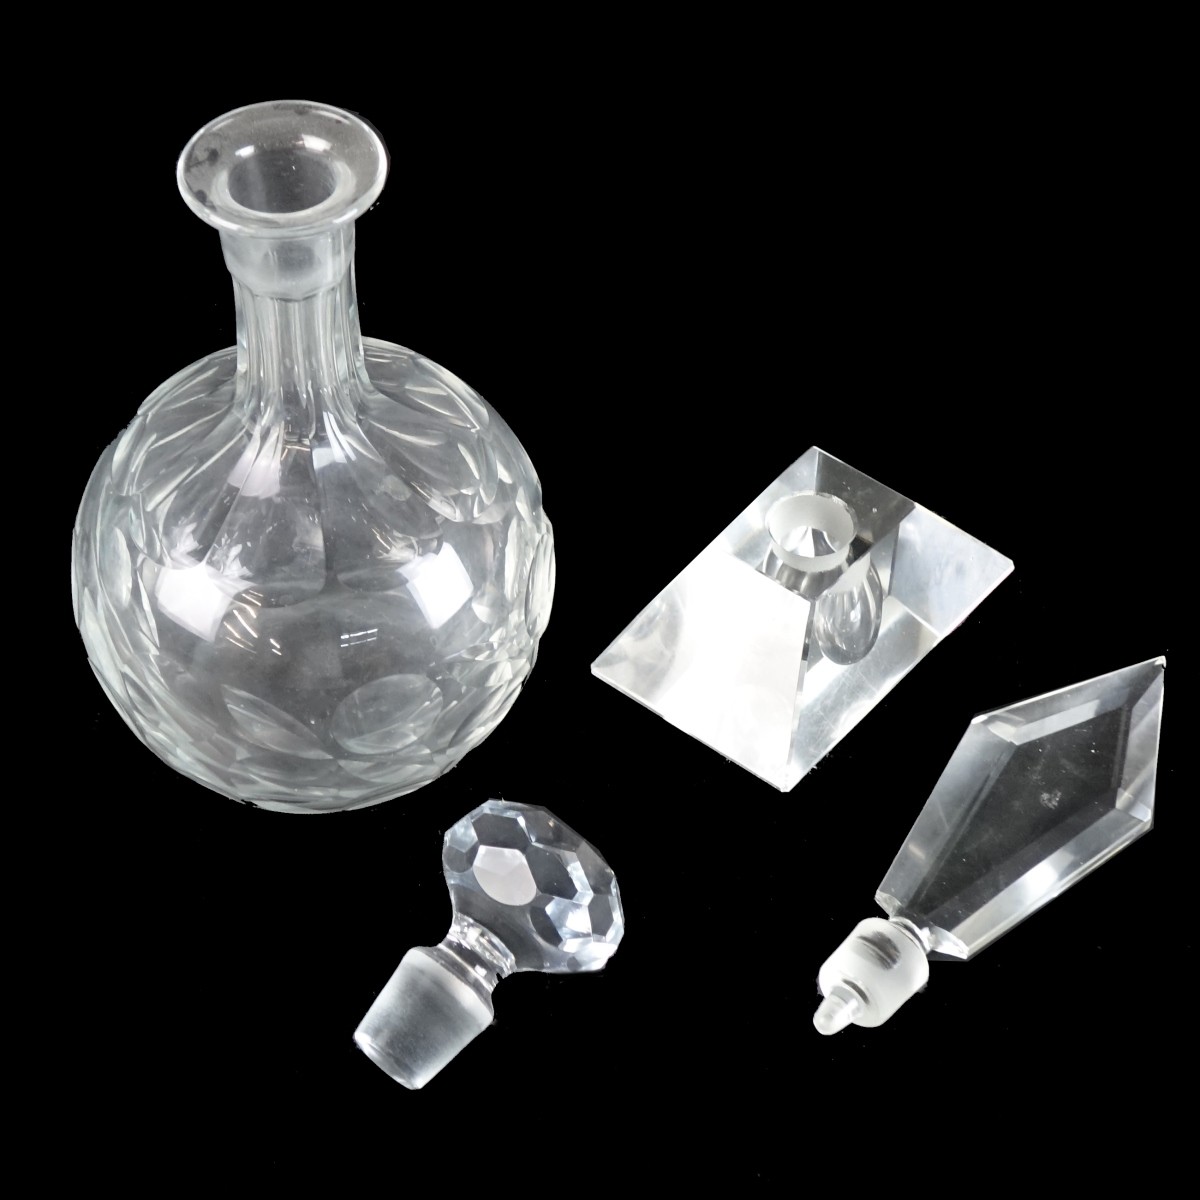 Decanter and Perfume Bottle